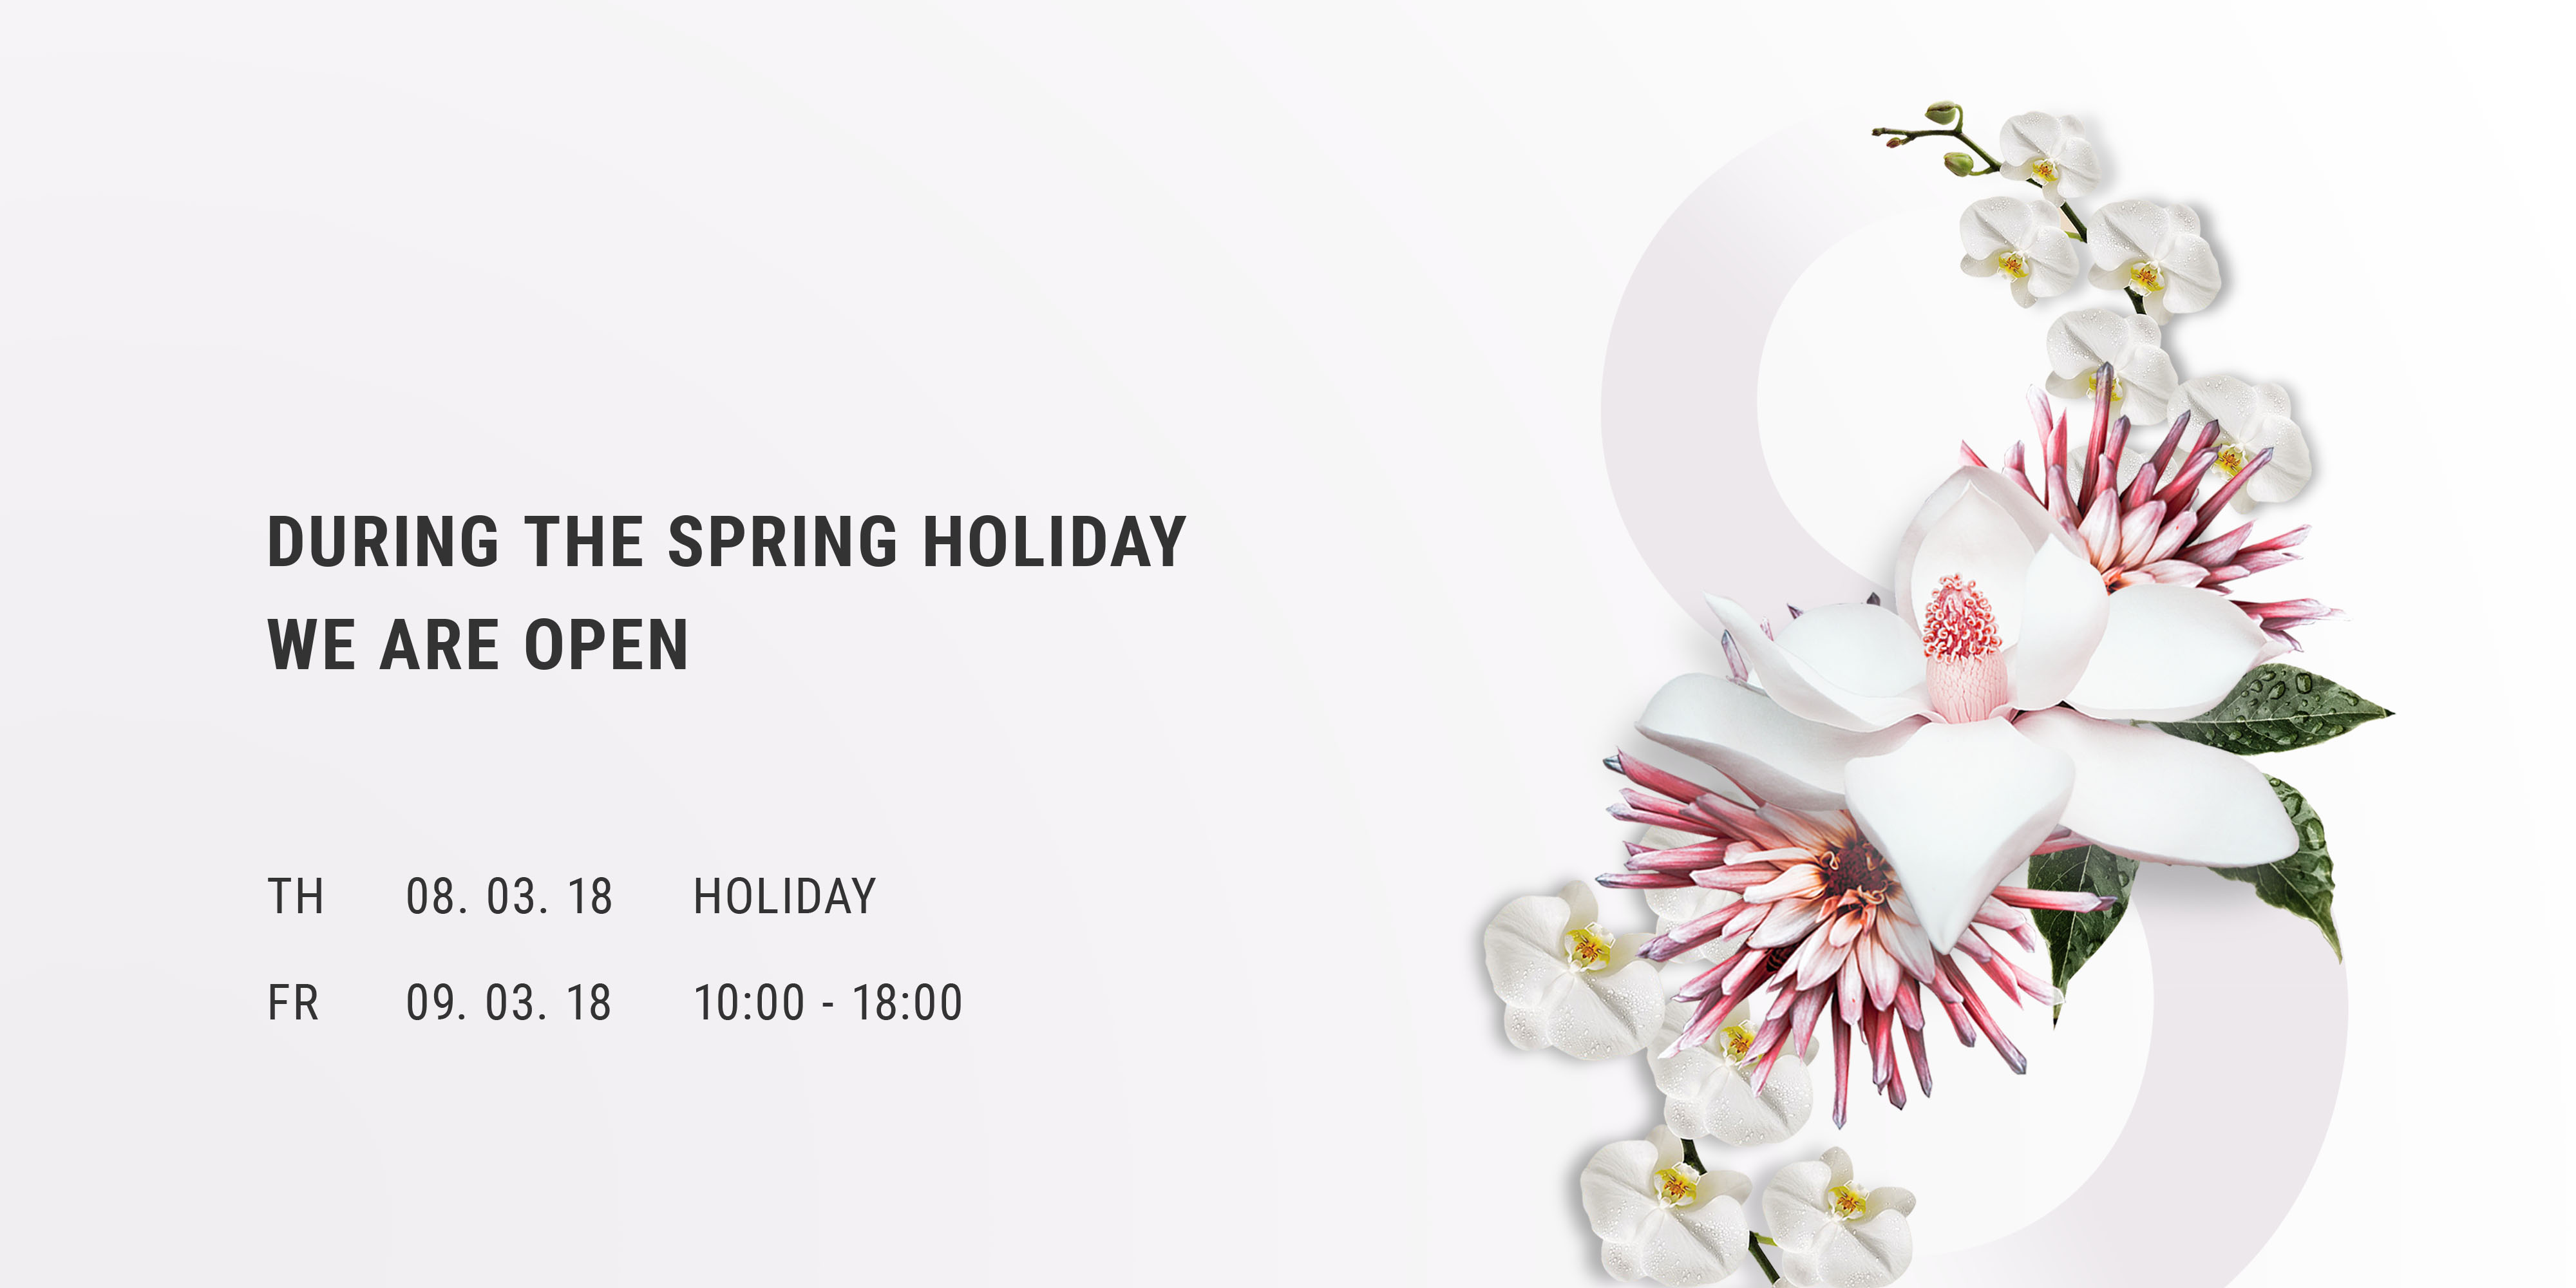 During the spring holidays we are open